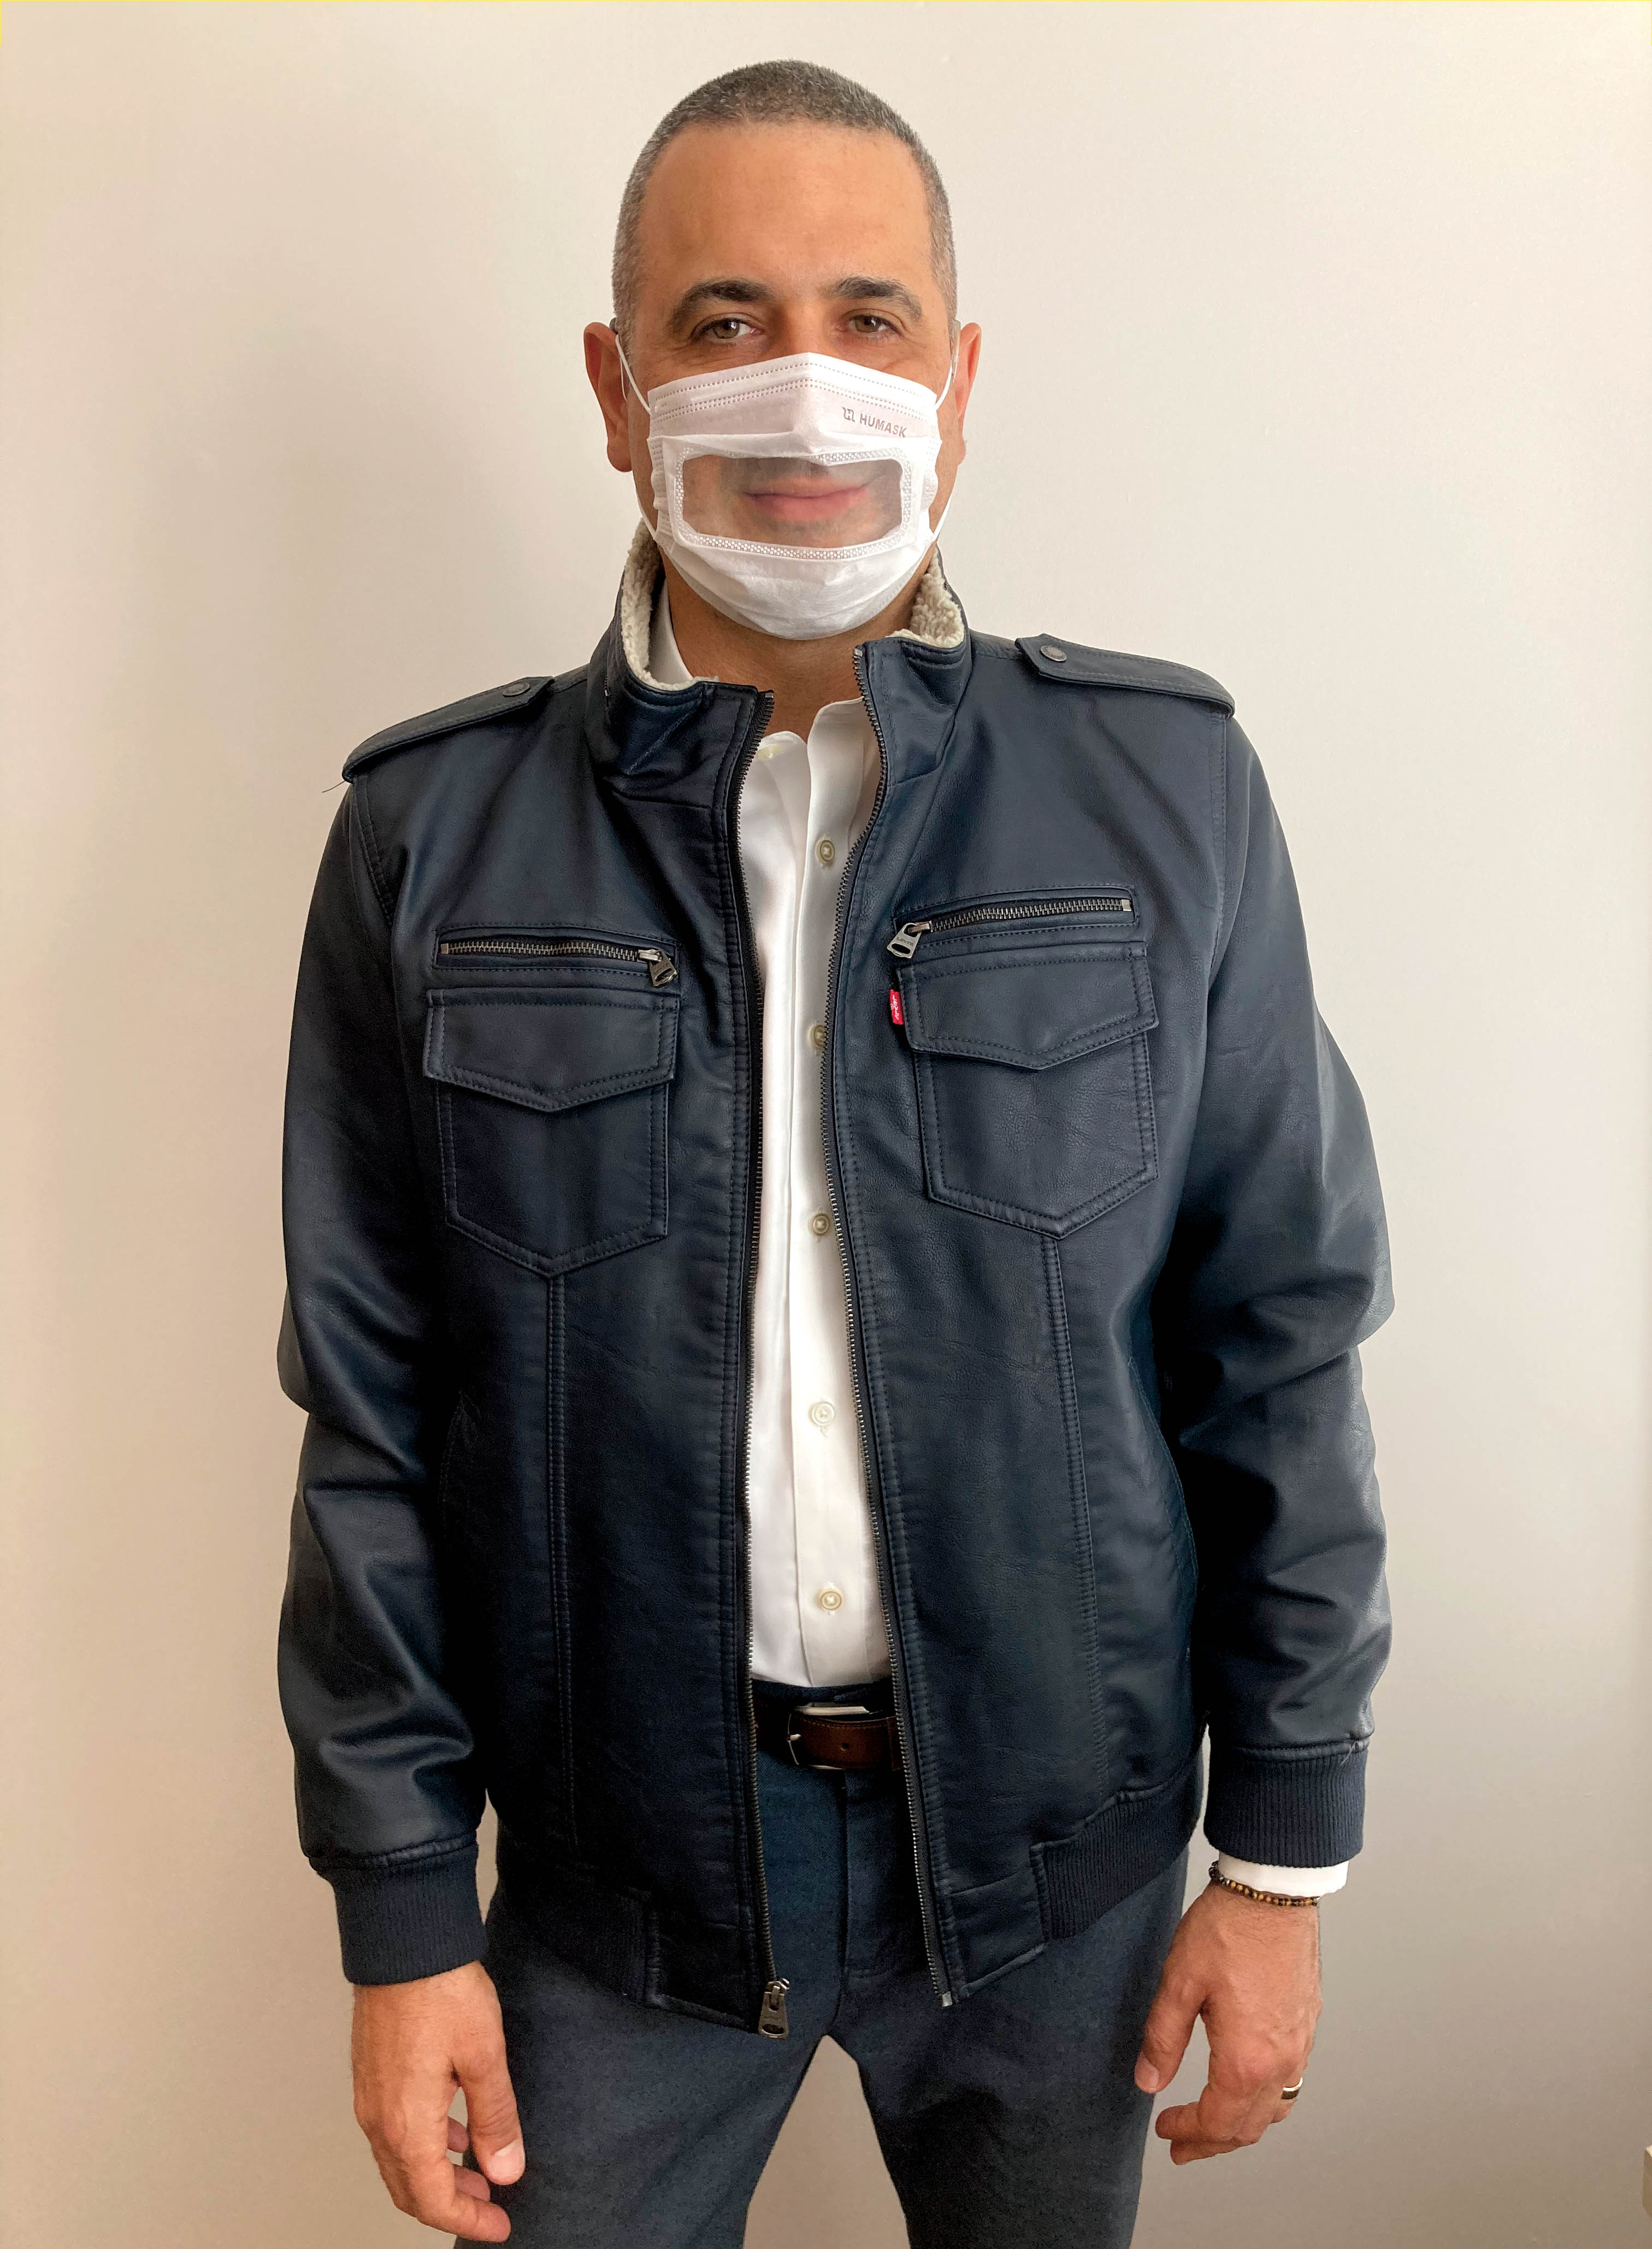 Angelo Tocco, OCT, advocates for the use of clear masks, to support accessibility and inclusion.